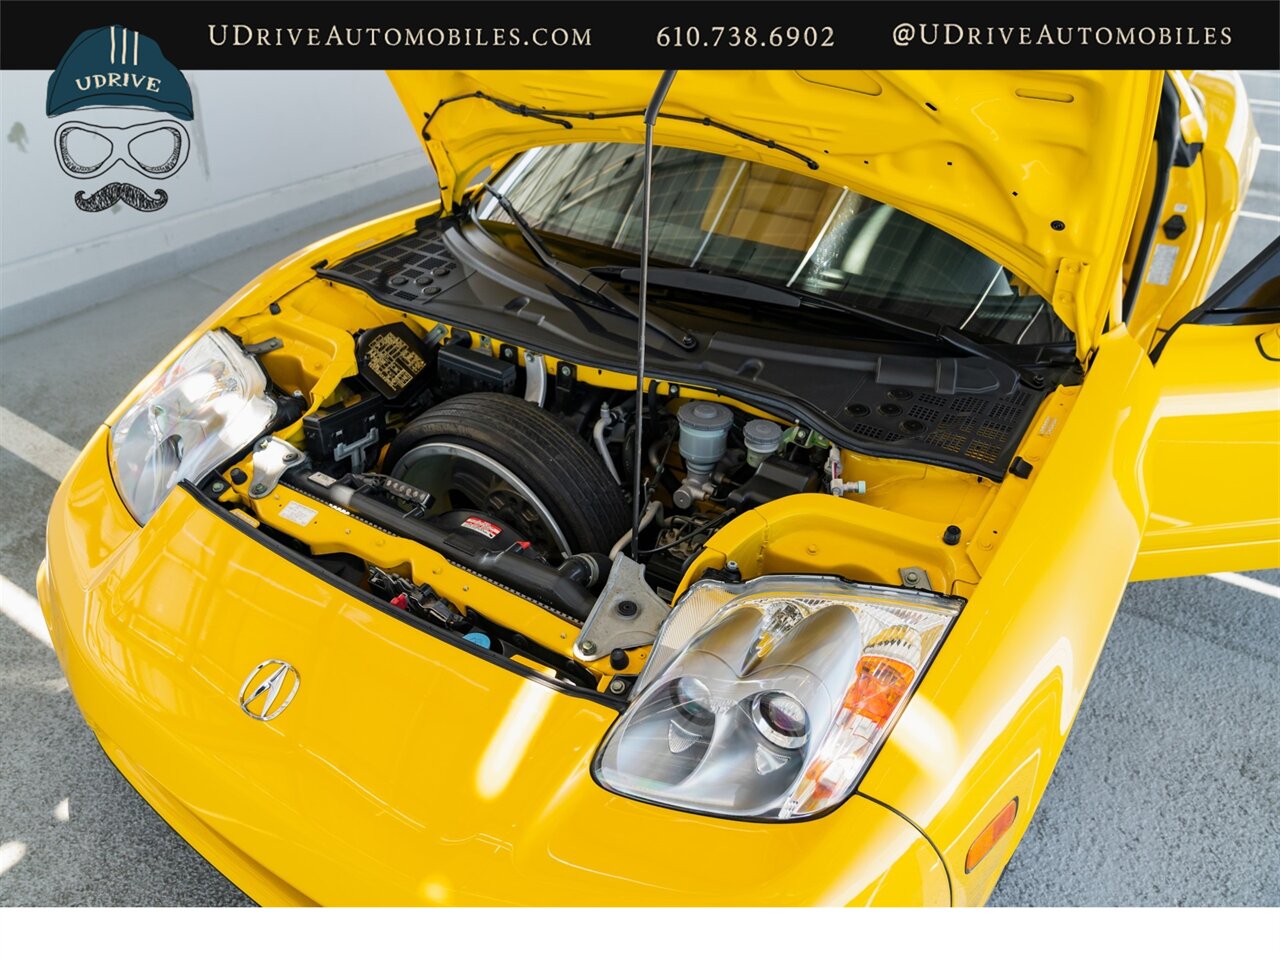 2003 Acura NSX NSX-T  Spa Yellow over Yellow Lthr 1 of 13 Produced - Photo 48 - West Chester, PA 19382